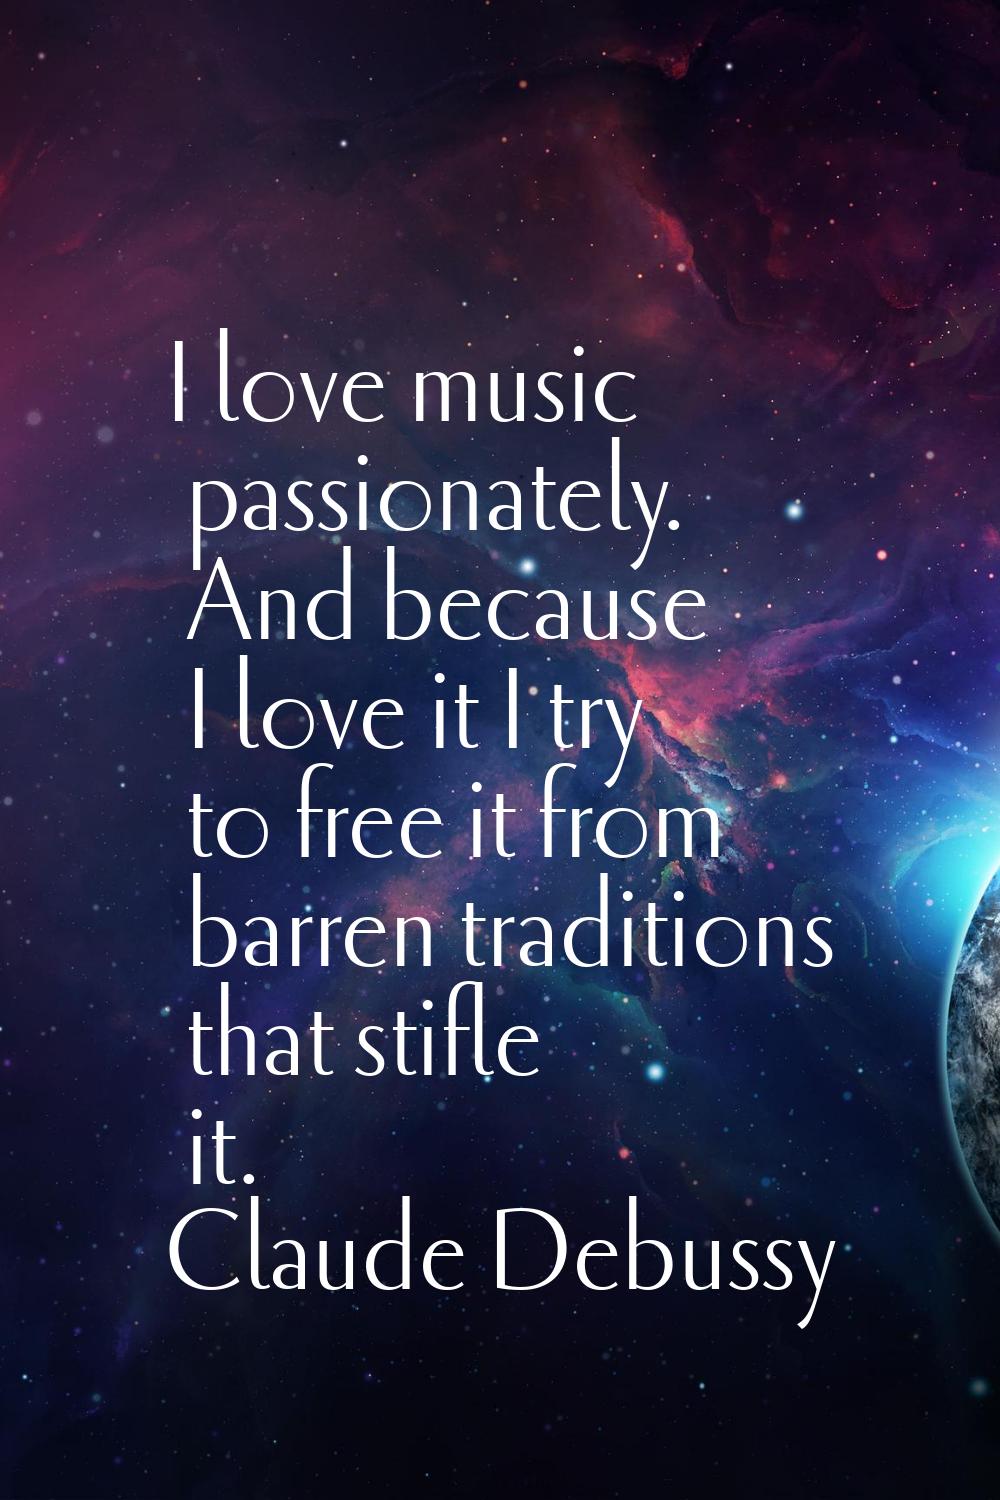 I love music passionately. And because I love it I try to free it from barren traditions that stifl